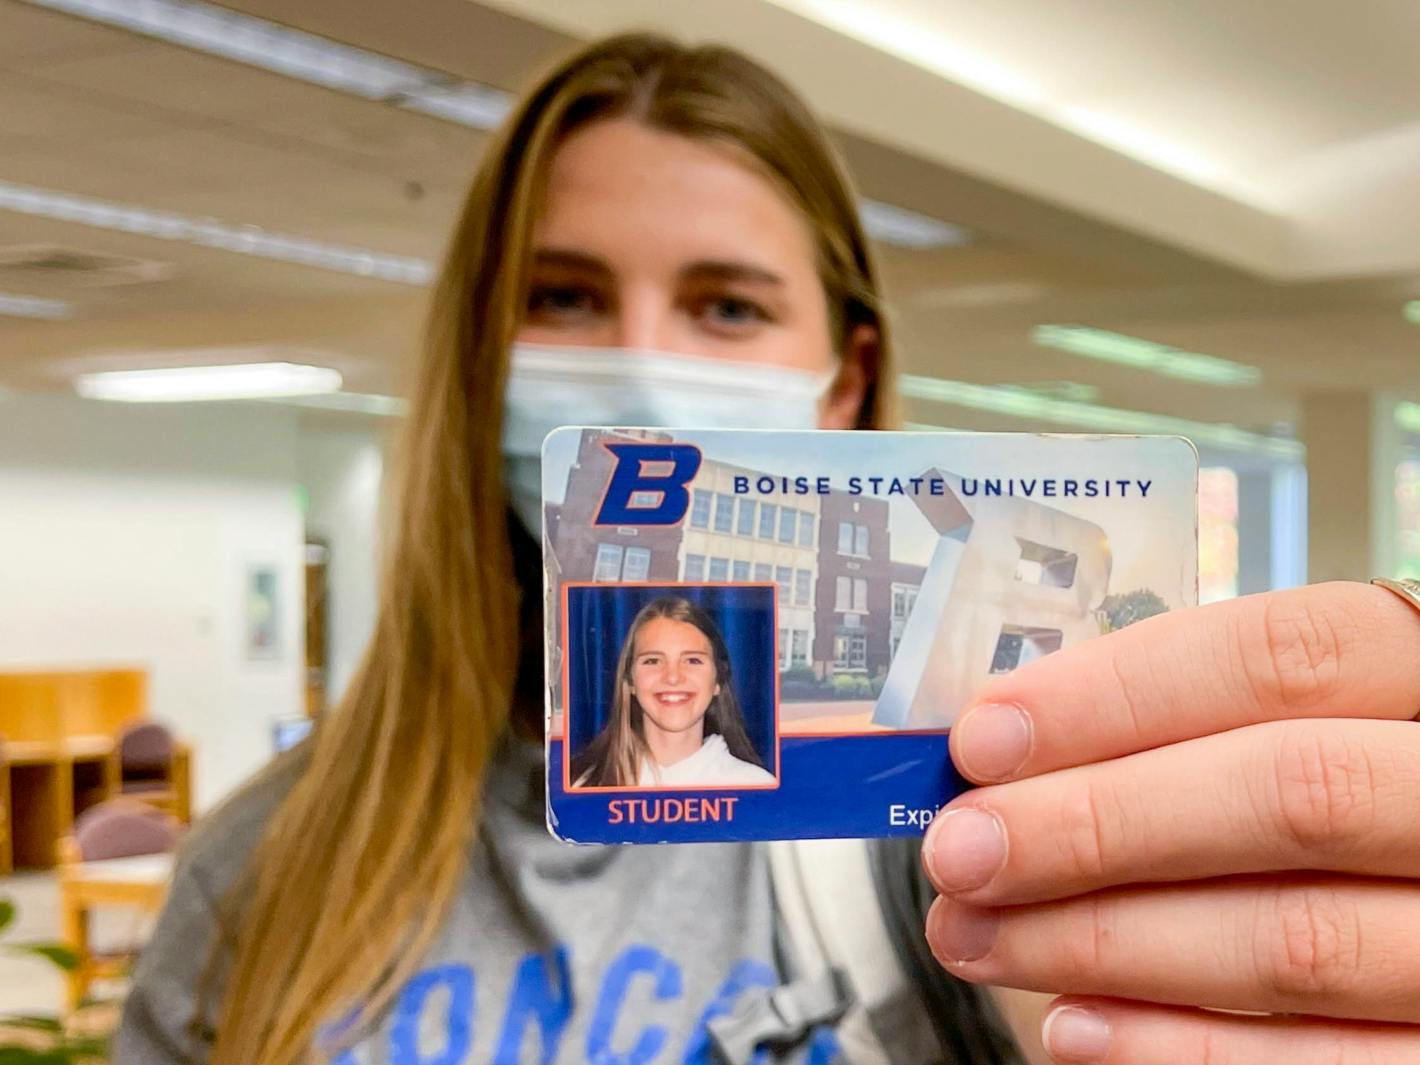 A student wearing a mask, holding up her ID card for Boise State University.